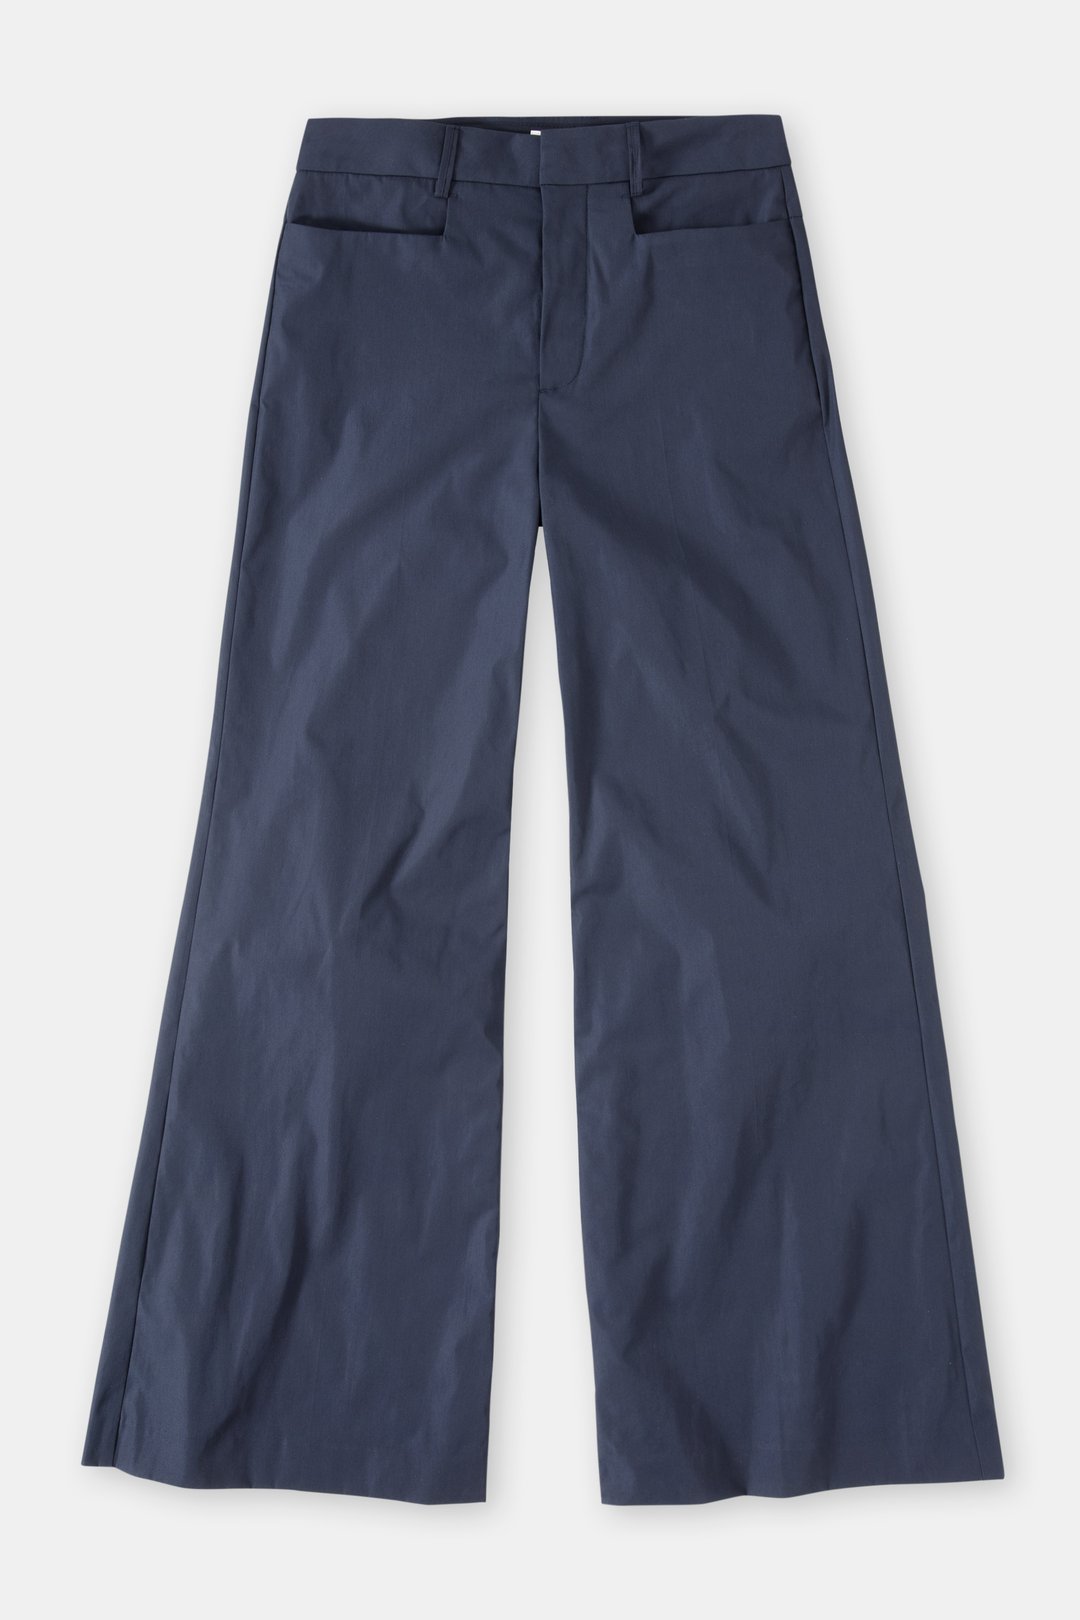 WIDE PANTS - STYLE NAME VEOLA | CLOSED